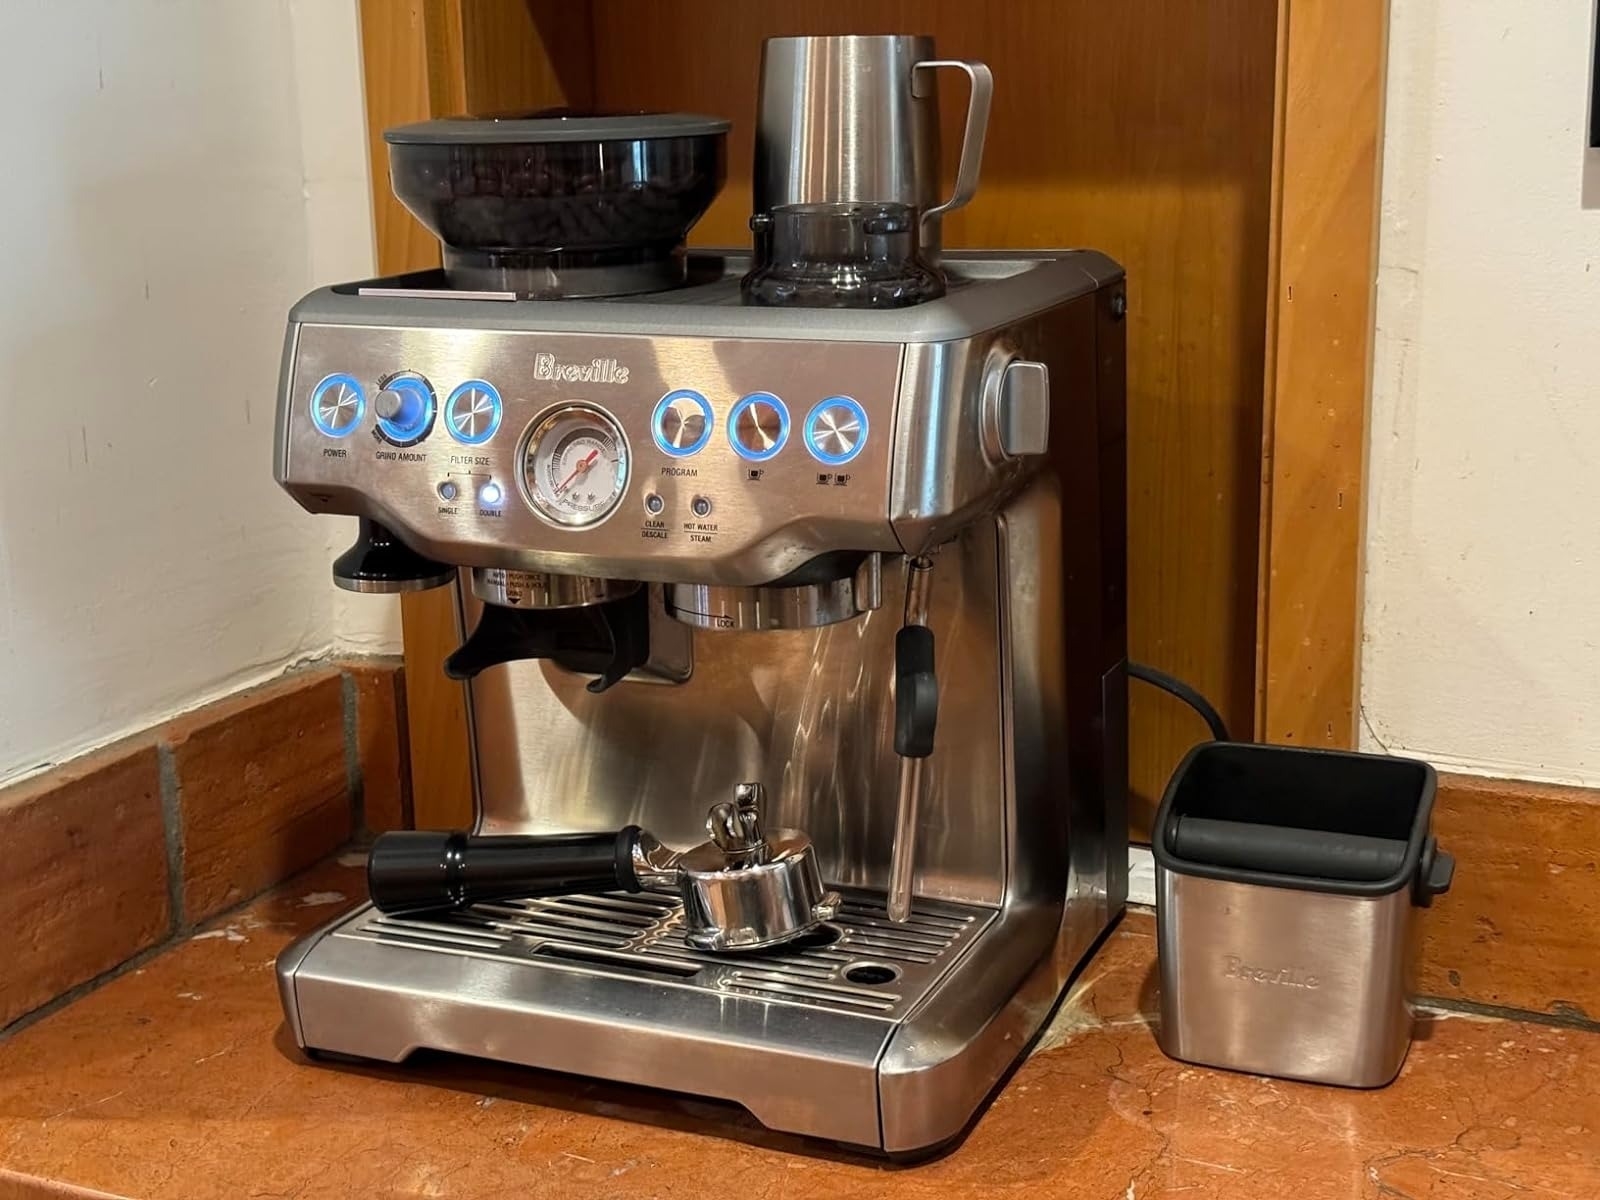 Stainless steel espresso machine with buttons and a gauge, next to a silver pitcher and black container